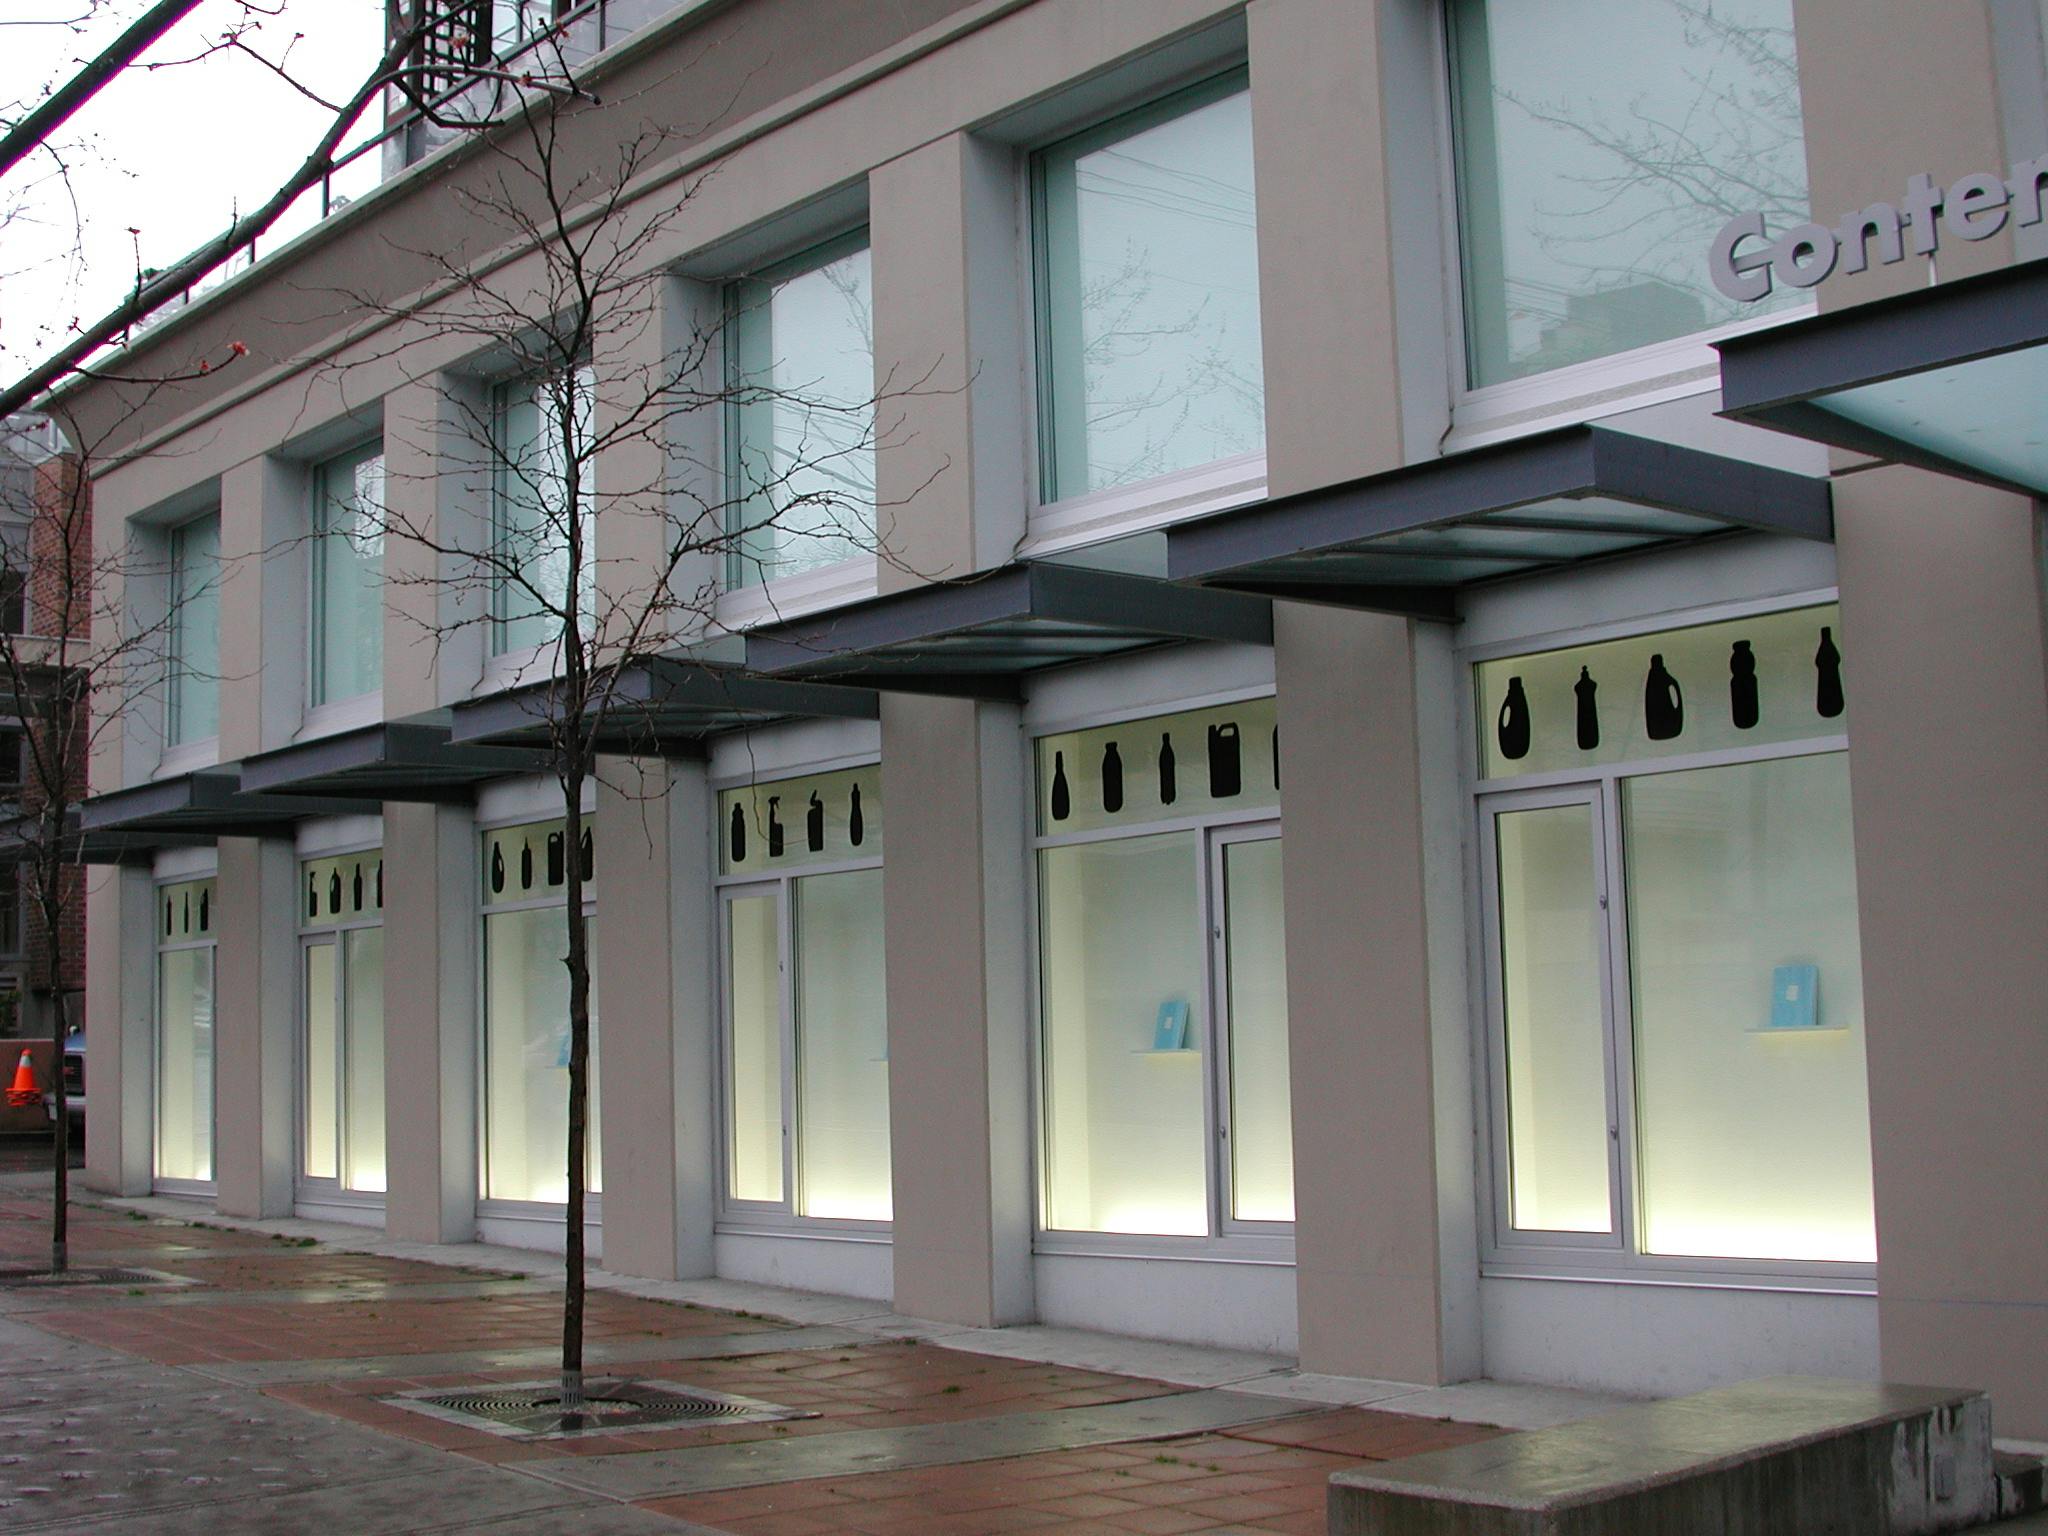 This is an installation shot of CAG’s building facade. Silhouettes of household objects such as cleaning sprays are printed at the top of the windows. Books are installed inside the window spaces.